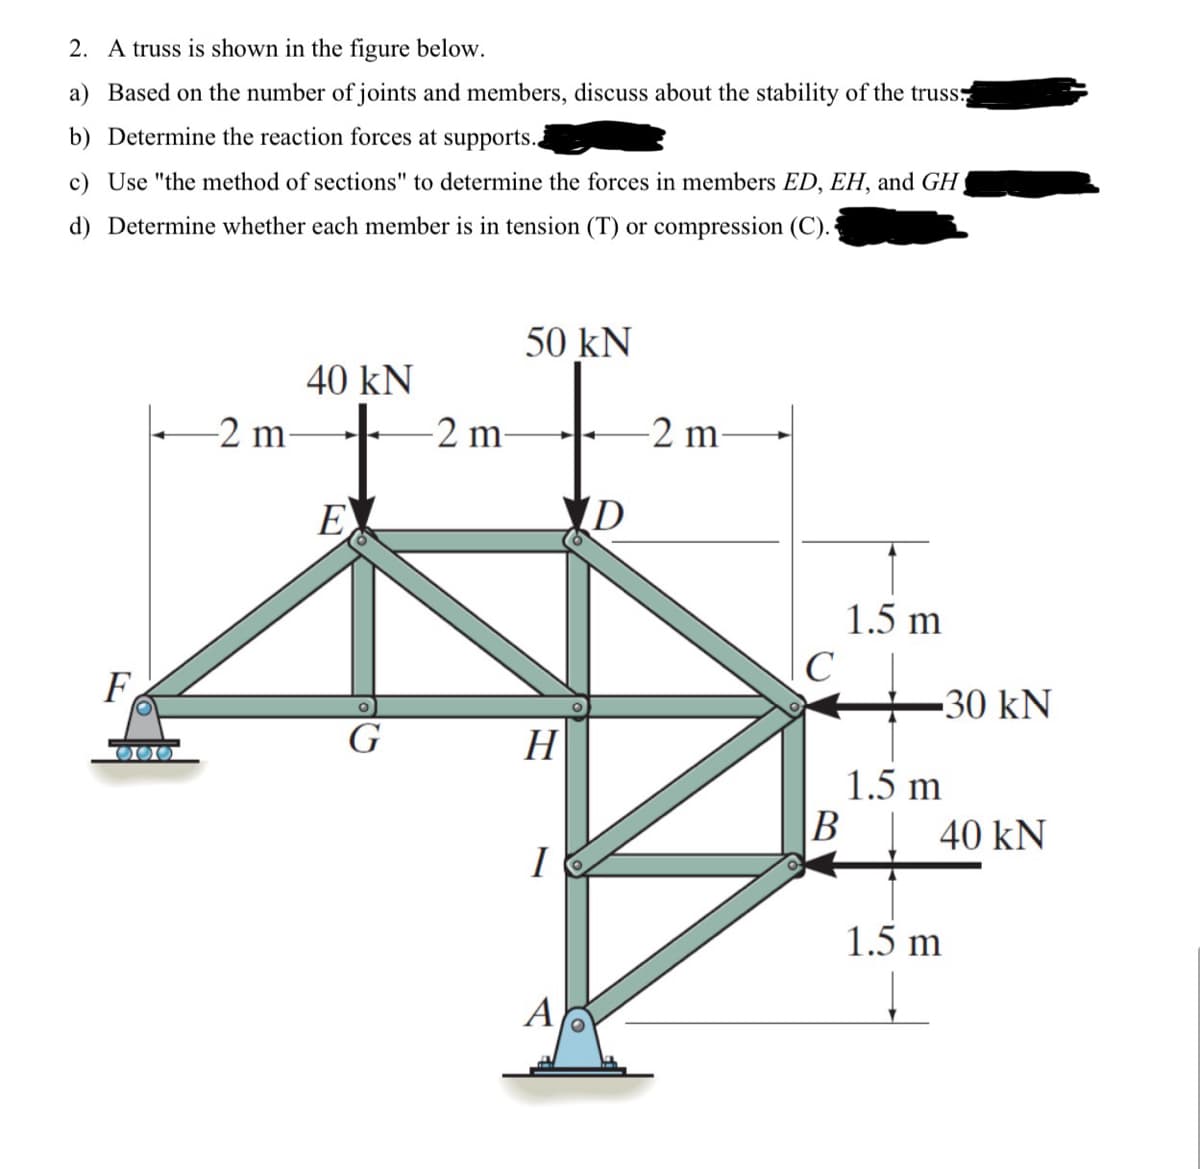 2. A truss is shown in the figure below.
a) Based on the number of joints and members, discuss about the stability of the truss
b) Determine the reaction forces at supports..
c) Use "the method of sections" to determine the forces in members ED, EH, and GH,
d) Determine whether each member is in tension (T) or compression (C).
50 kN
40 kN
2 m
-2 m-
-2 m
D
E
F
O
1.5 m
C
-30 kN
G
H
1.5 m
B
40 kN
I
A
1.5 m